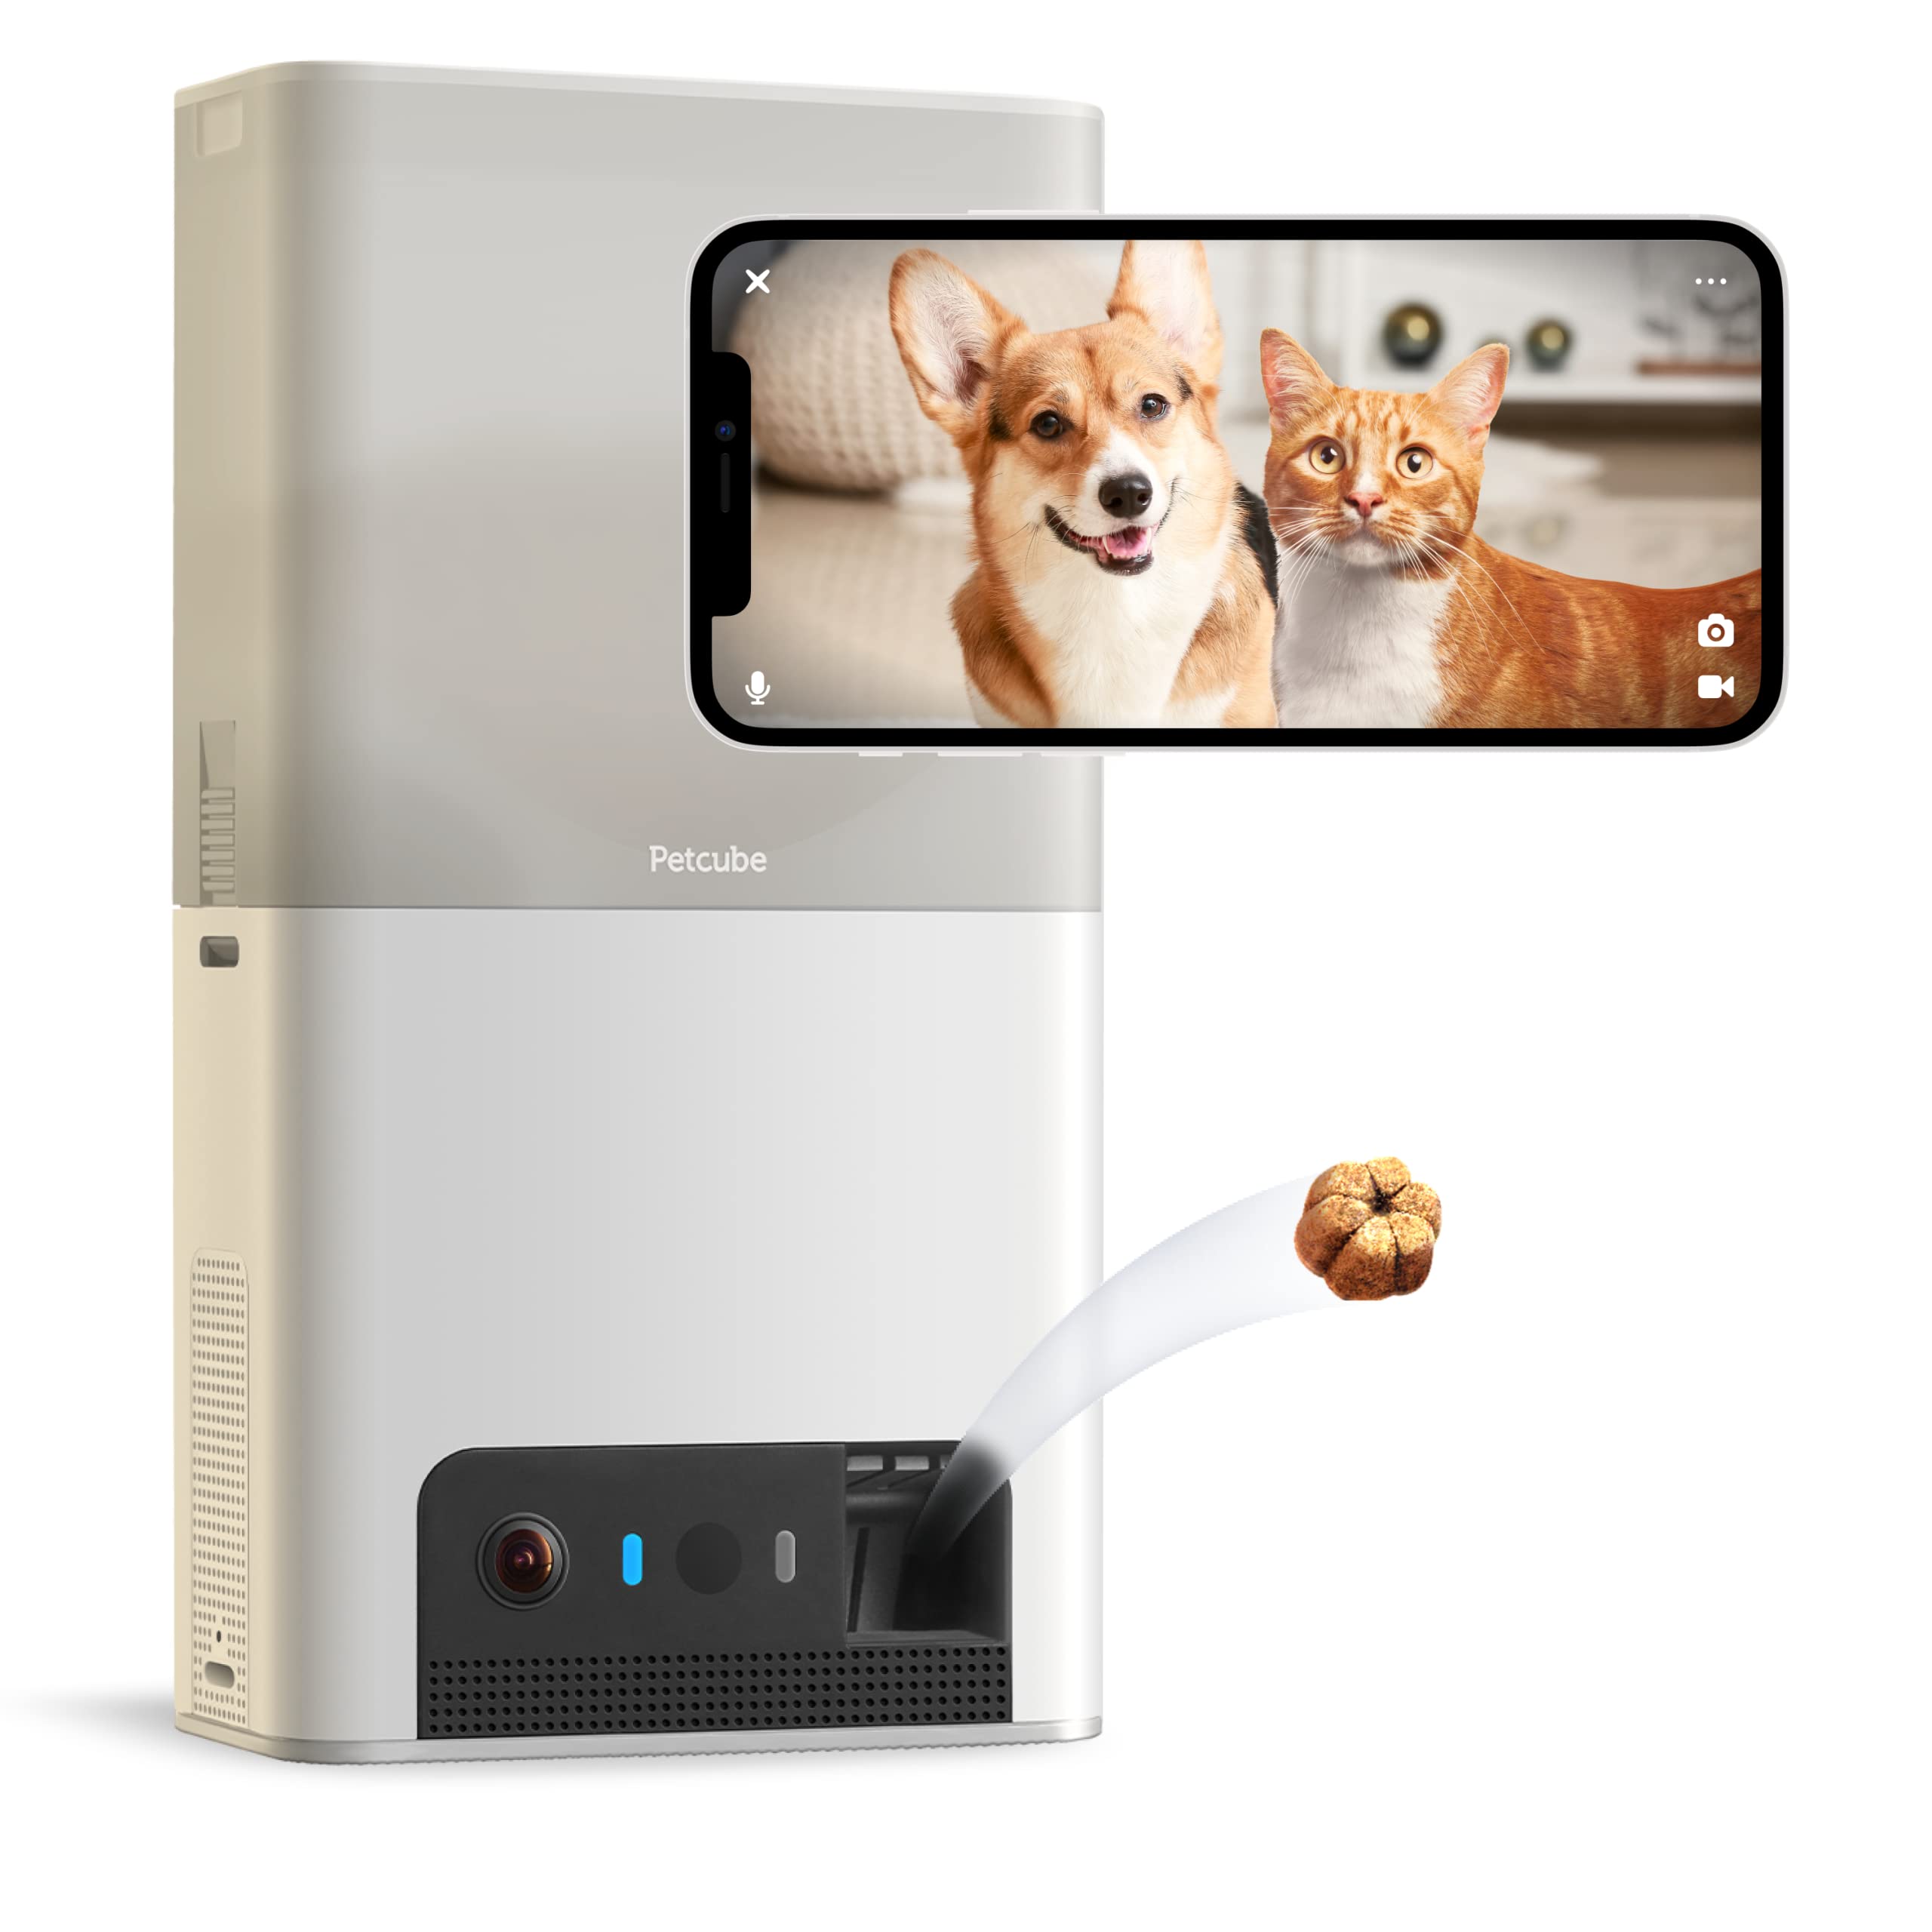 Petcube Bites 2 Lite Interactive WiFi Pet Monitoring Camera with Phone App and Treat Dispenser $99.95 + Free Shipping at Amazon